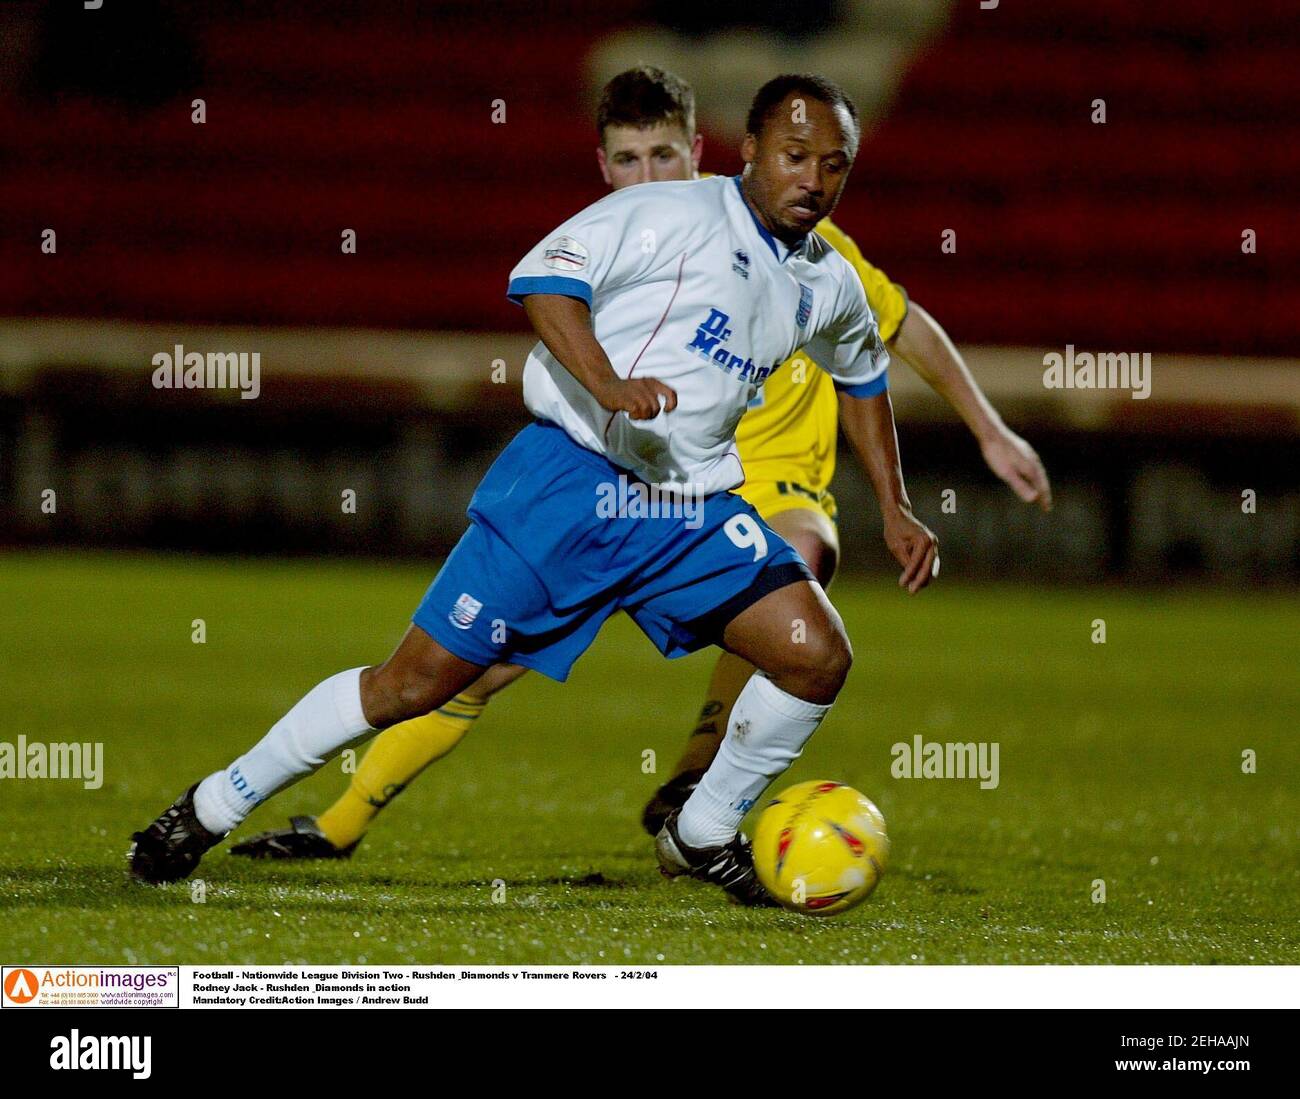 Football - Nationwide League Division Two - Rushden & Diamonds v Tranmere Rovers   - 24/2/04  Rodney Jack - Rushden & Diamonds in action  Mandatory Credit:Action Images / Andrew Budd Stock Photo